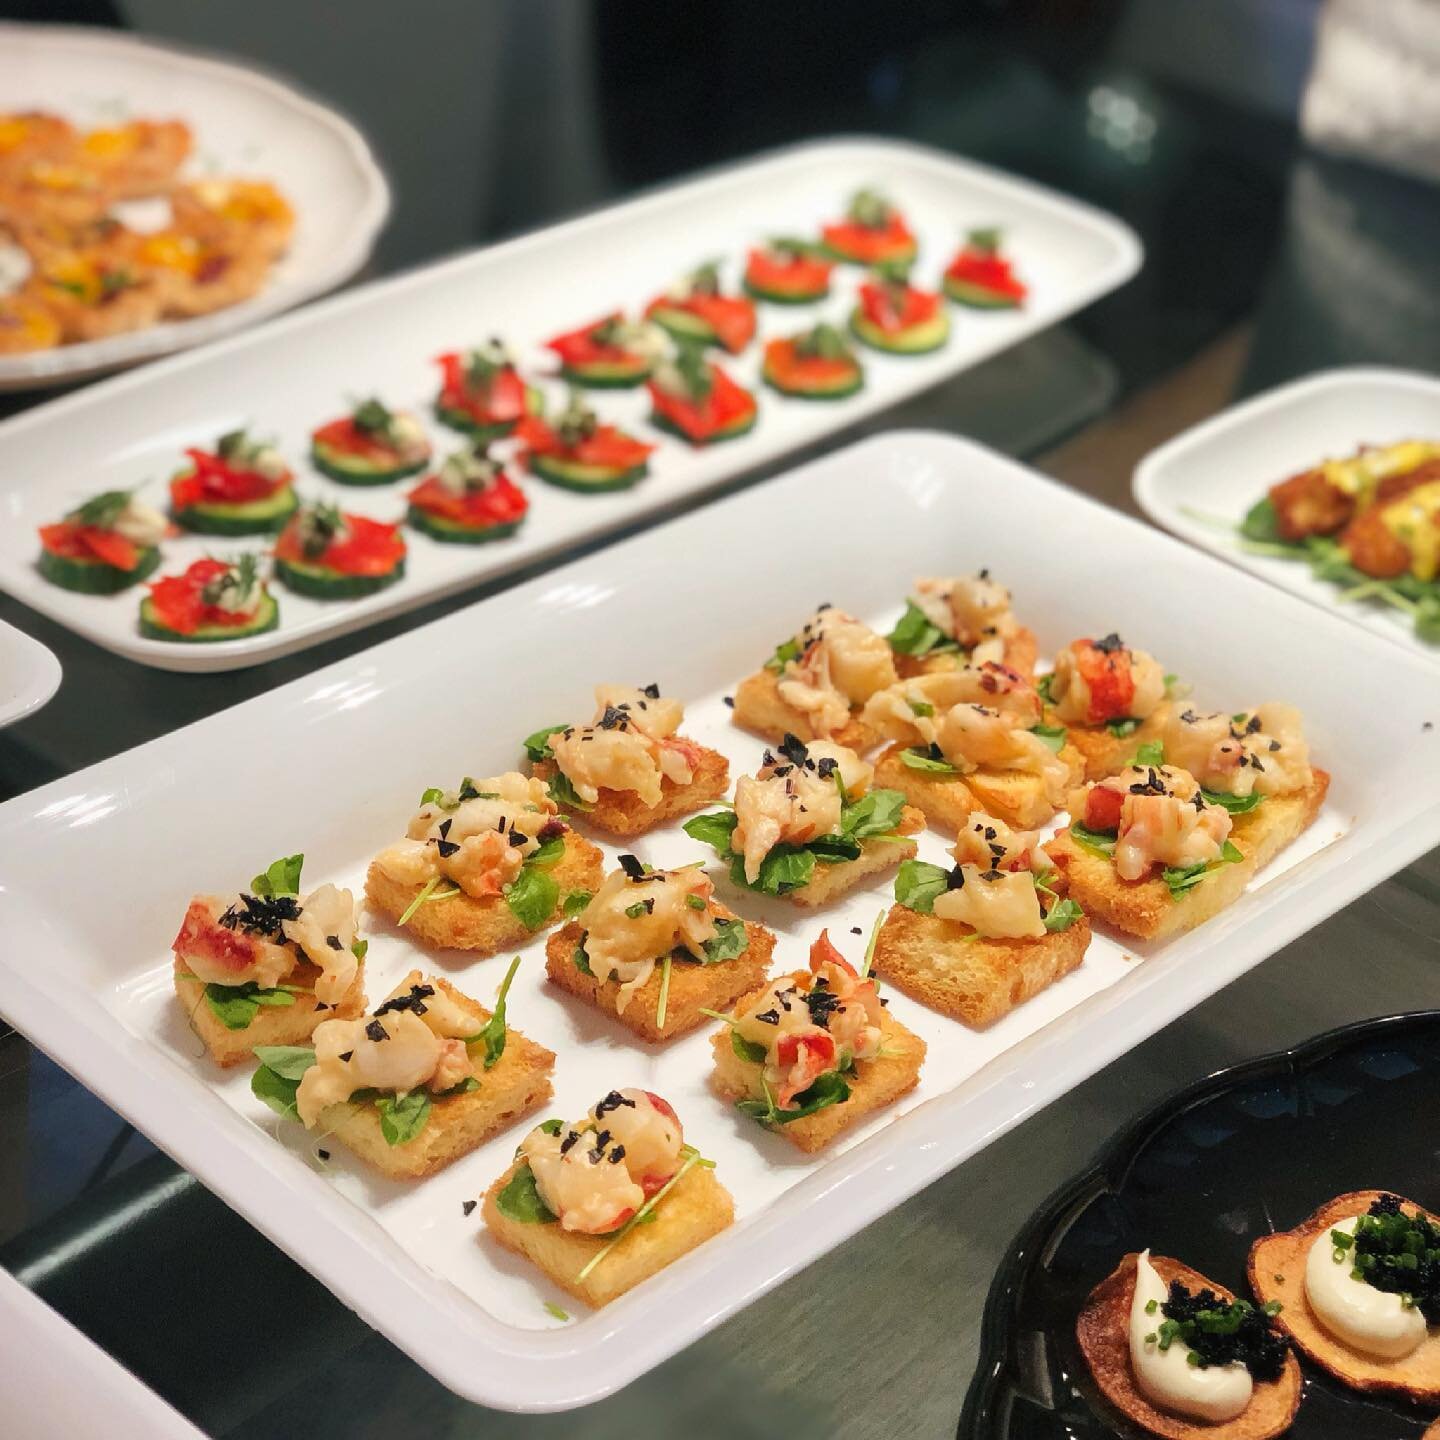 Amuse bouche by @taylorsfoodstuff &amp; I. 
Pictured first to last: 
Lobster Canap&eacute; 🦞 
Smoked Salmon bites 🥒 
Caviar on hand cut chips 🥔 
Prosciutto crostini 🍖
Petite croque Madame 🍳 
Goat cheese croquettes 🧀 
Made with love, in celebrat